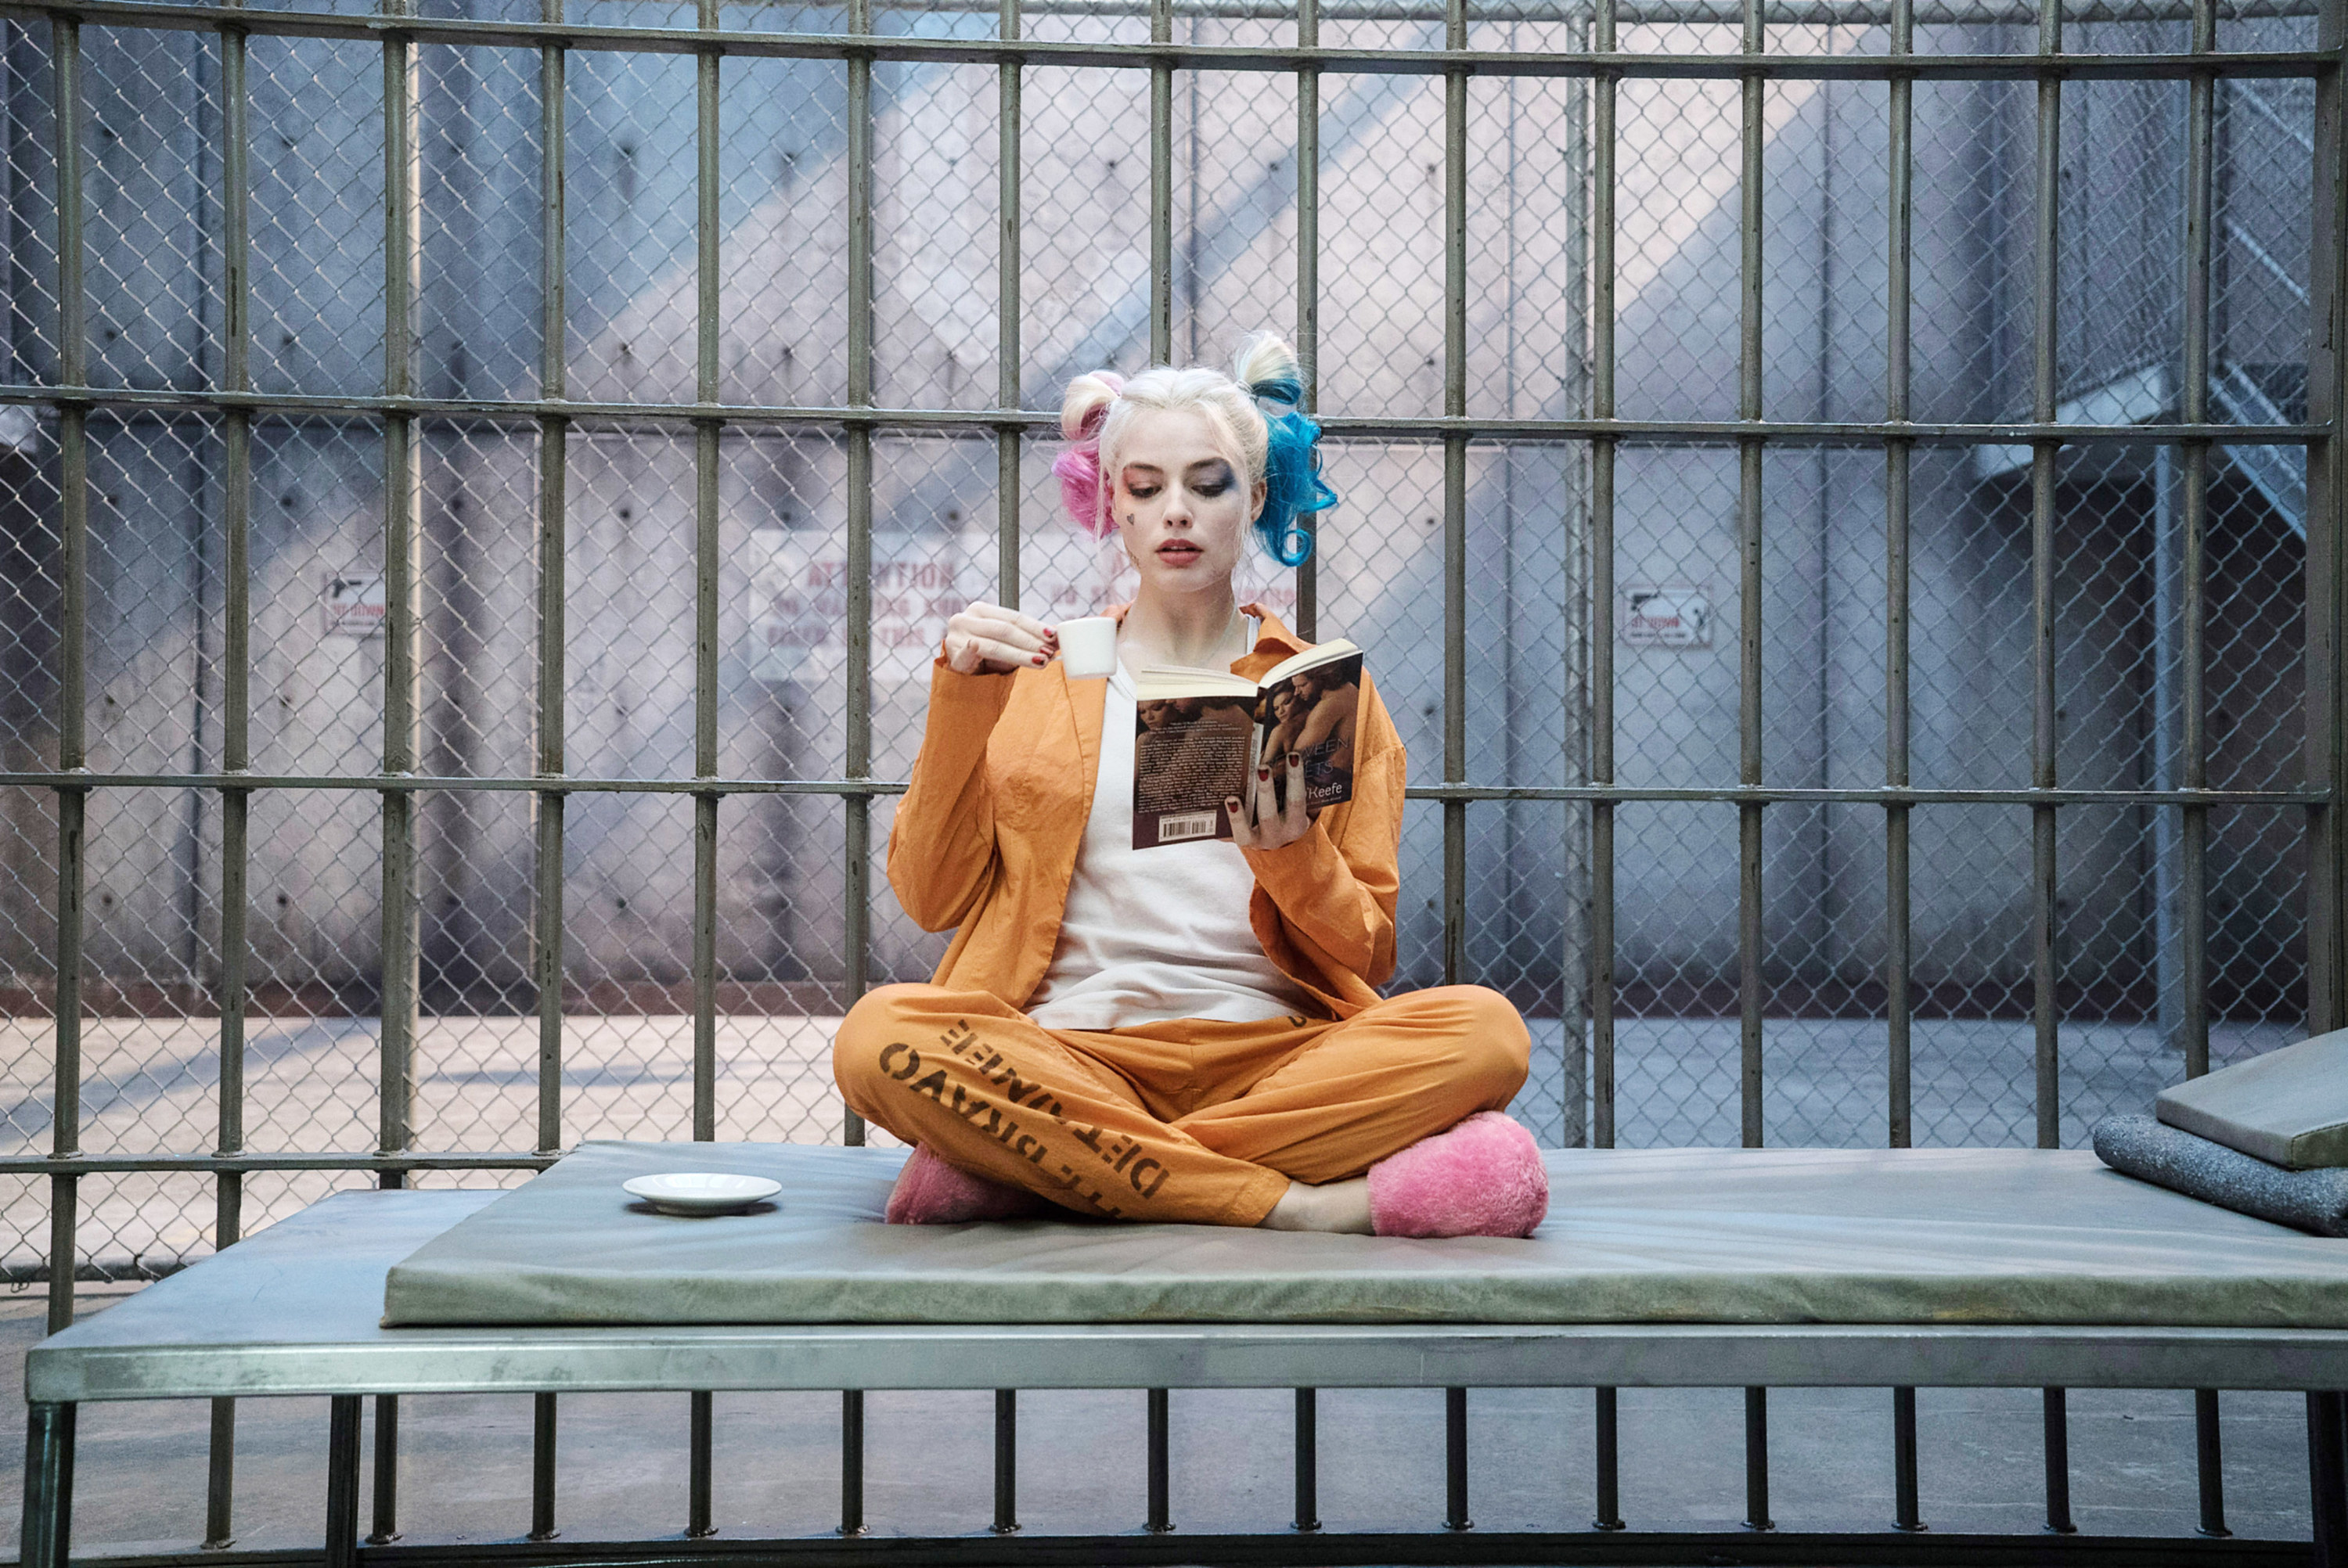 Harley in prison scrubs with the shirt open and a plain shirt underneath, and fuzzy slippers, with bun pigtails